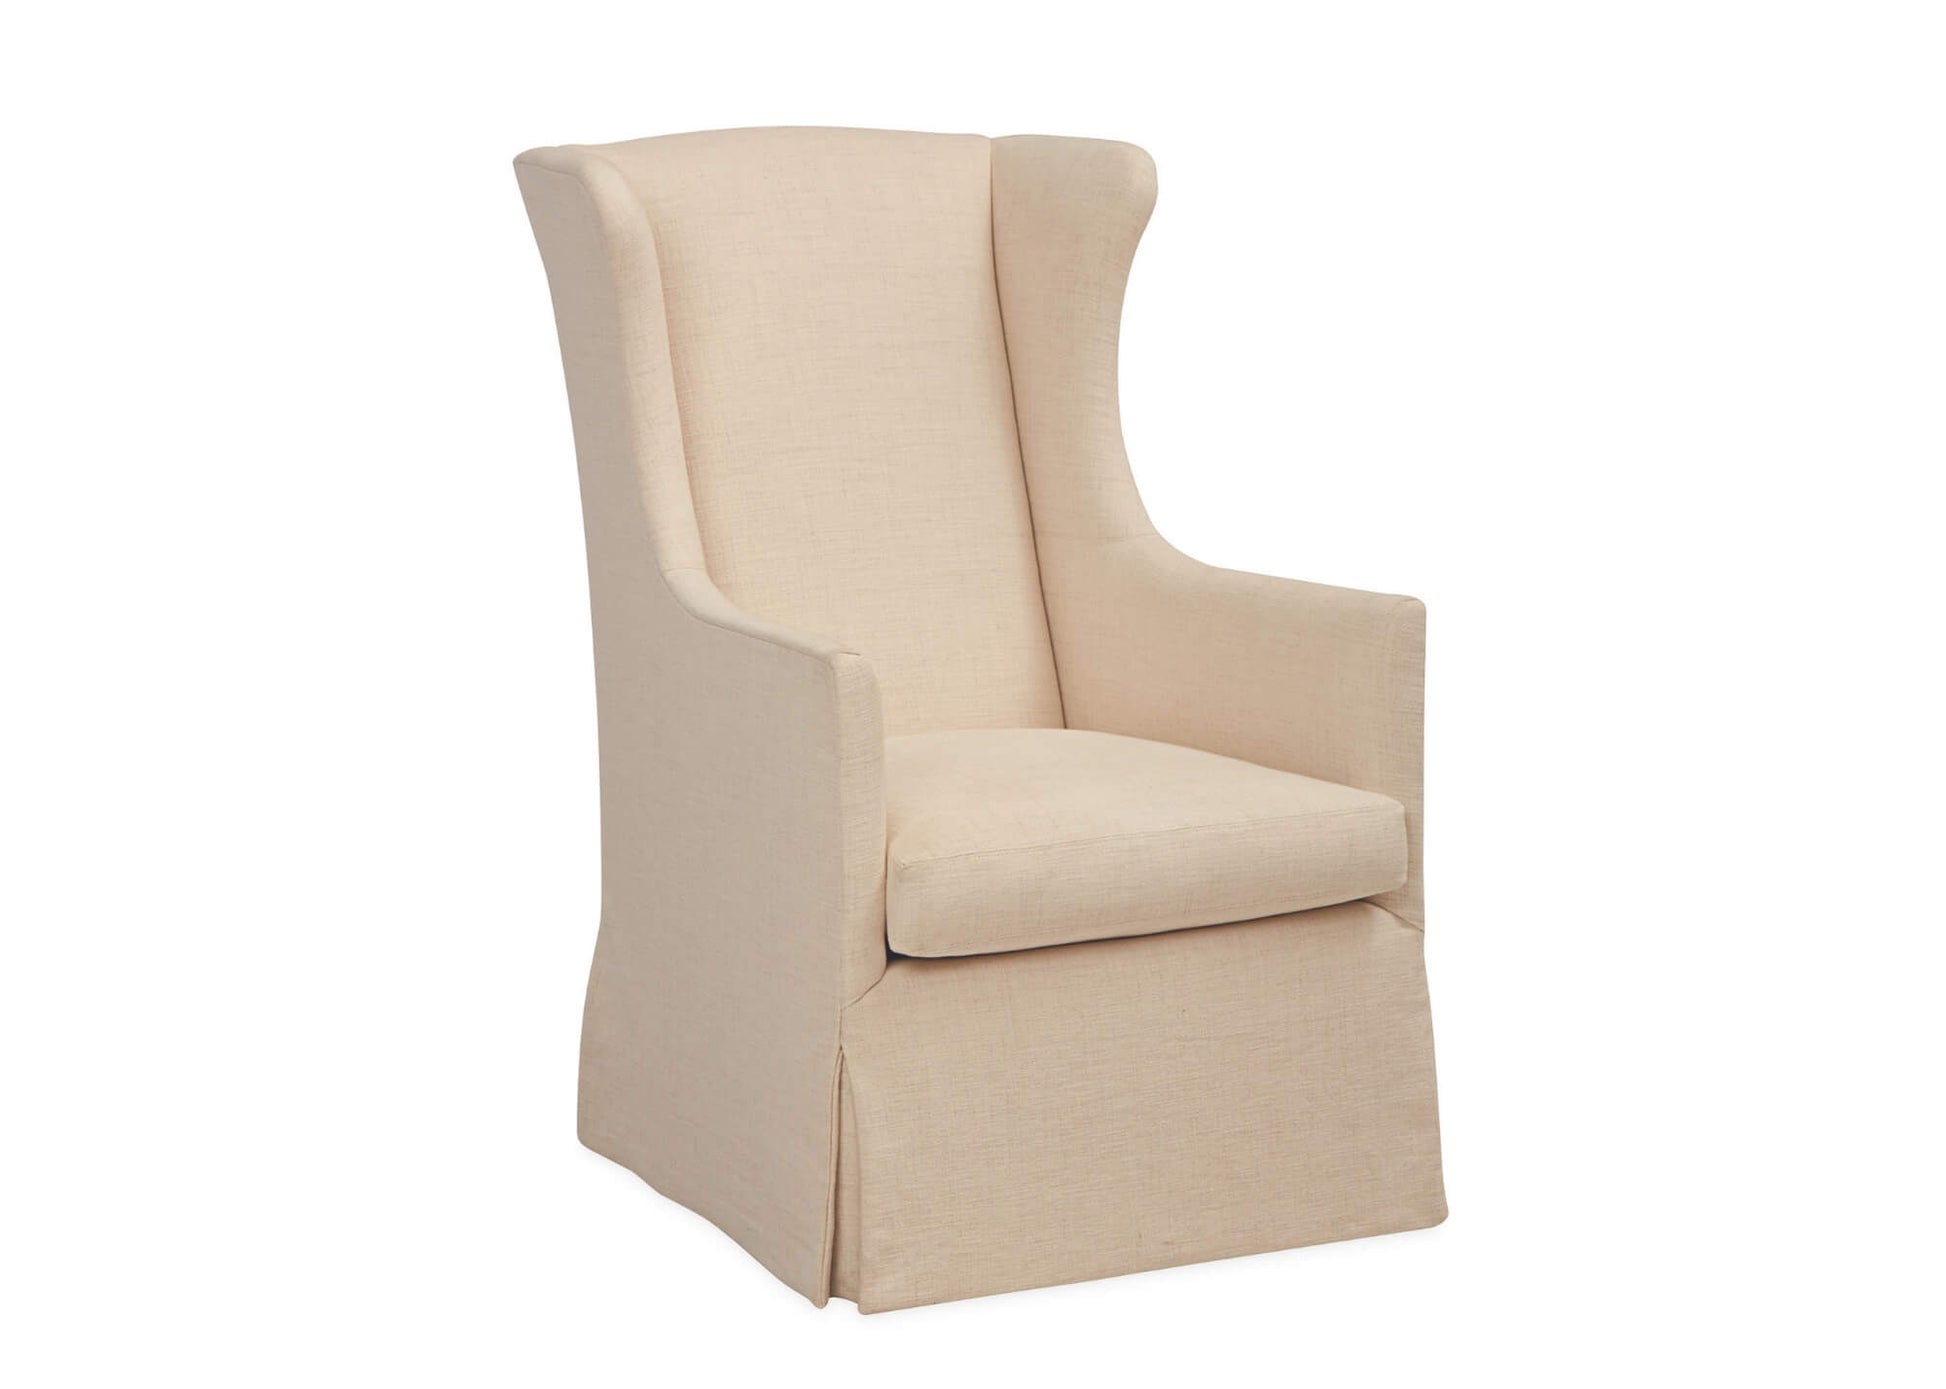 Lee Industries Swivel Chair in a creme fabric with a track arm. 